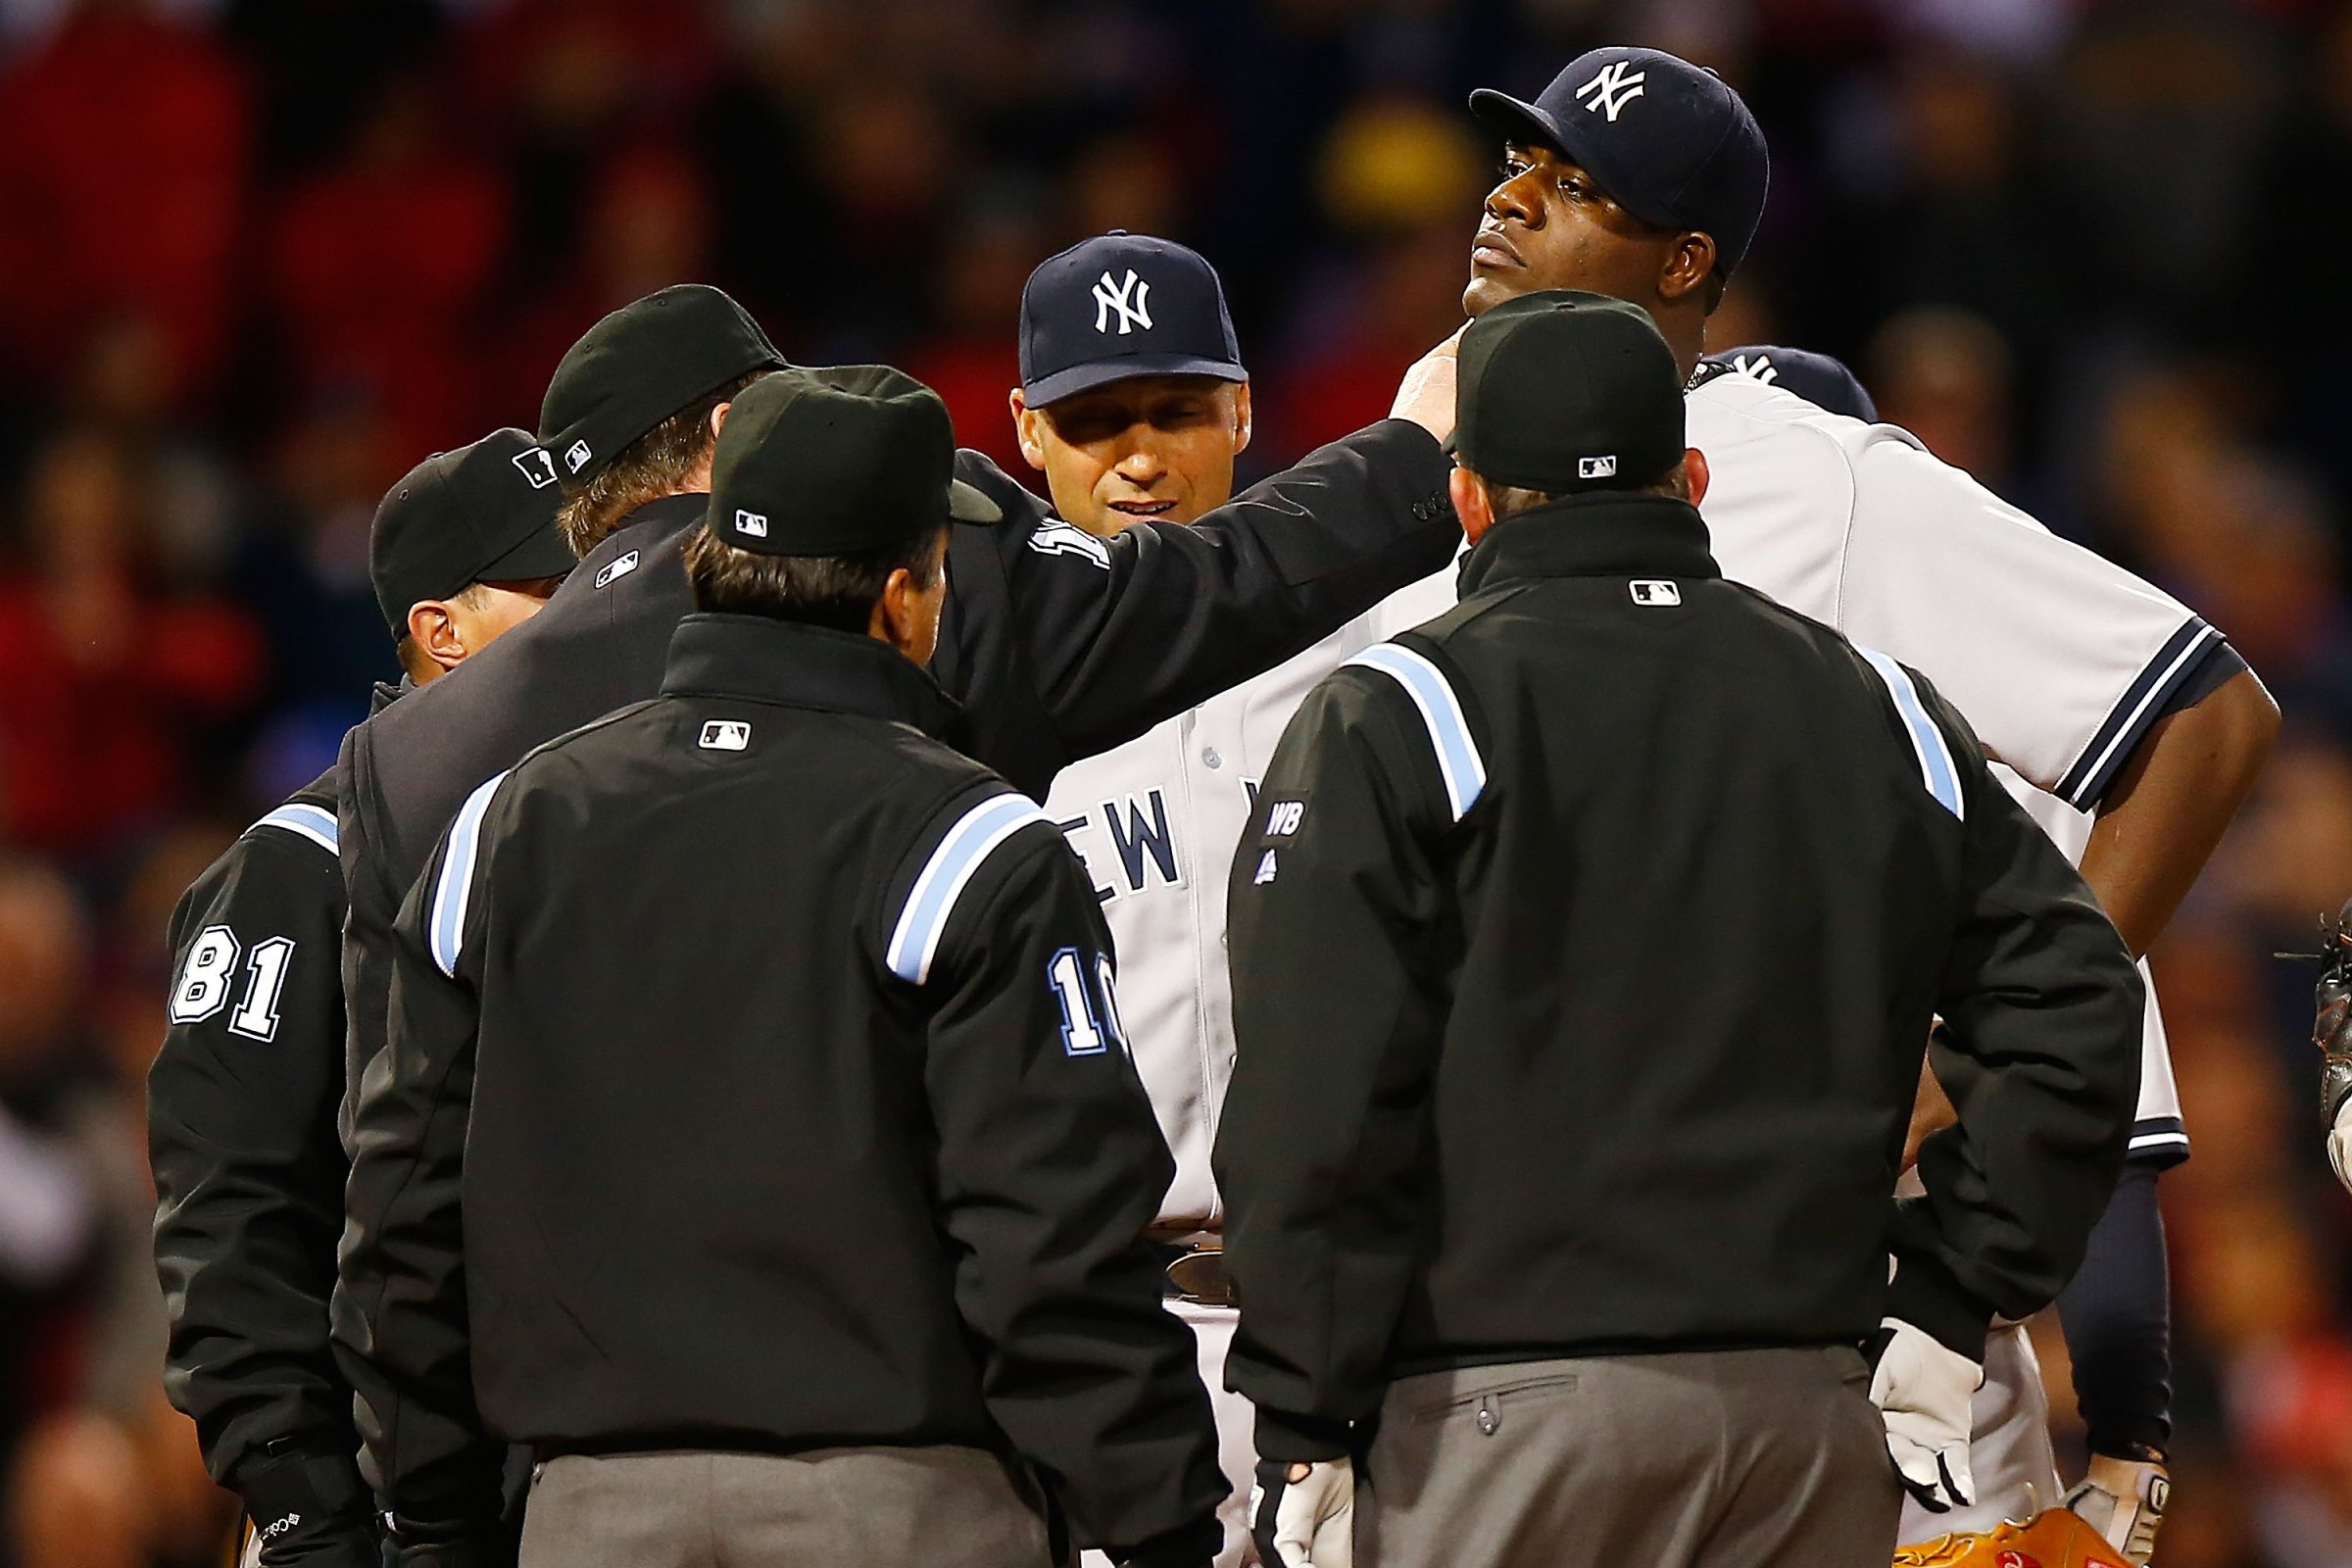 Umpires check Michael Pineda for a foreign substance as Derek Jeter looks on.